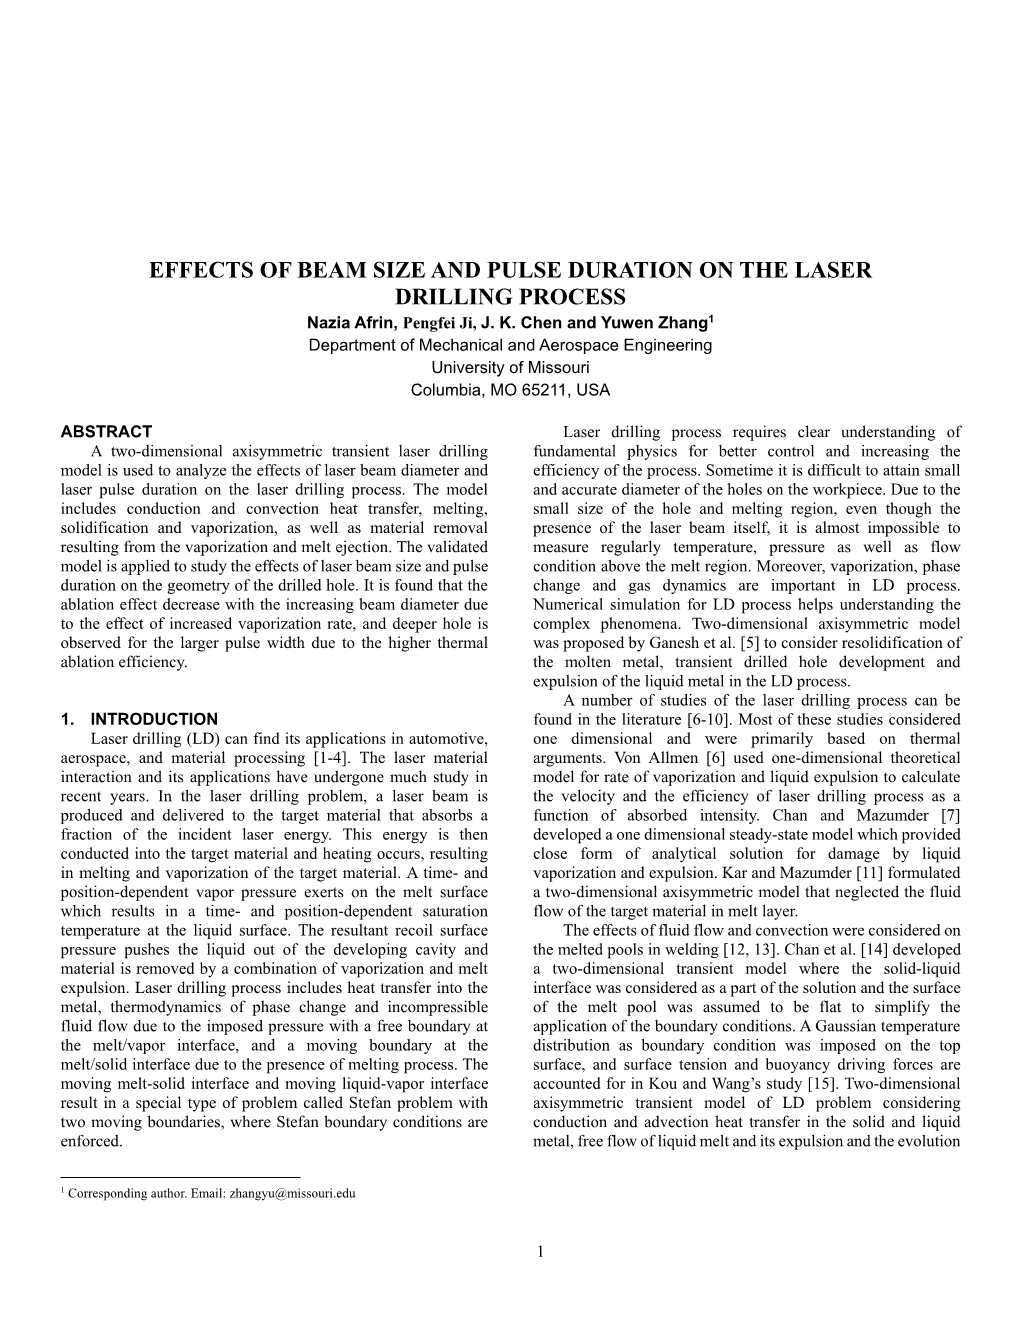 EFFECTS of BEAM SIZE and PULSE DURATION on the LASER DRILLING PROCESS Nazia Afrin, Pengfei Ji, J